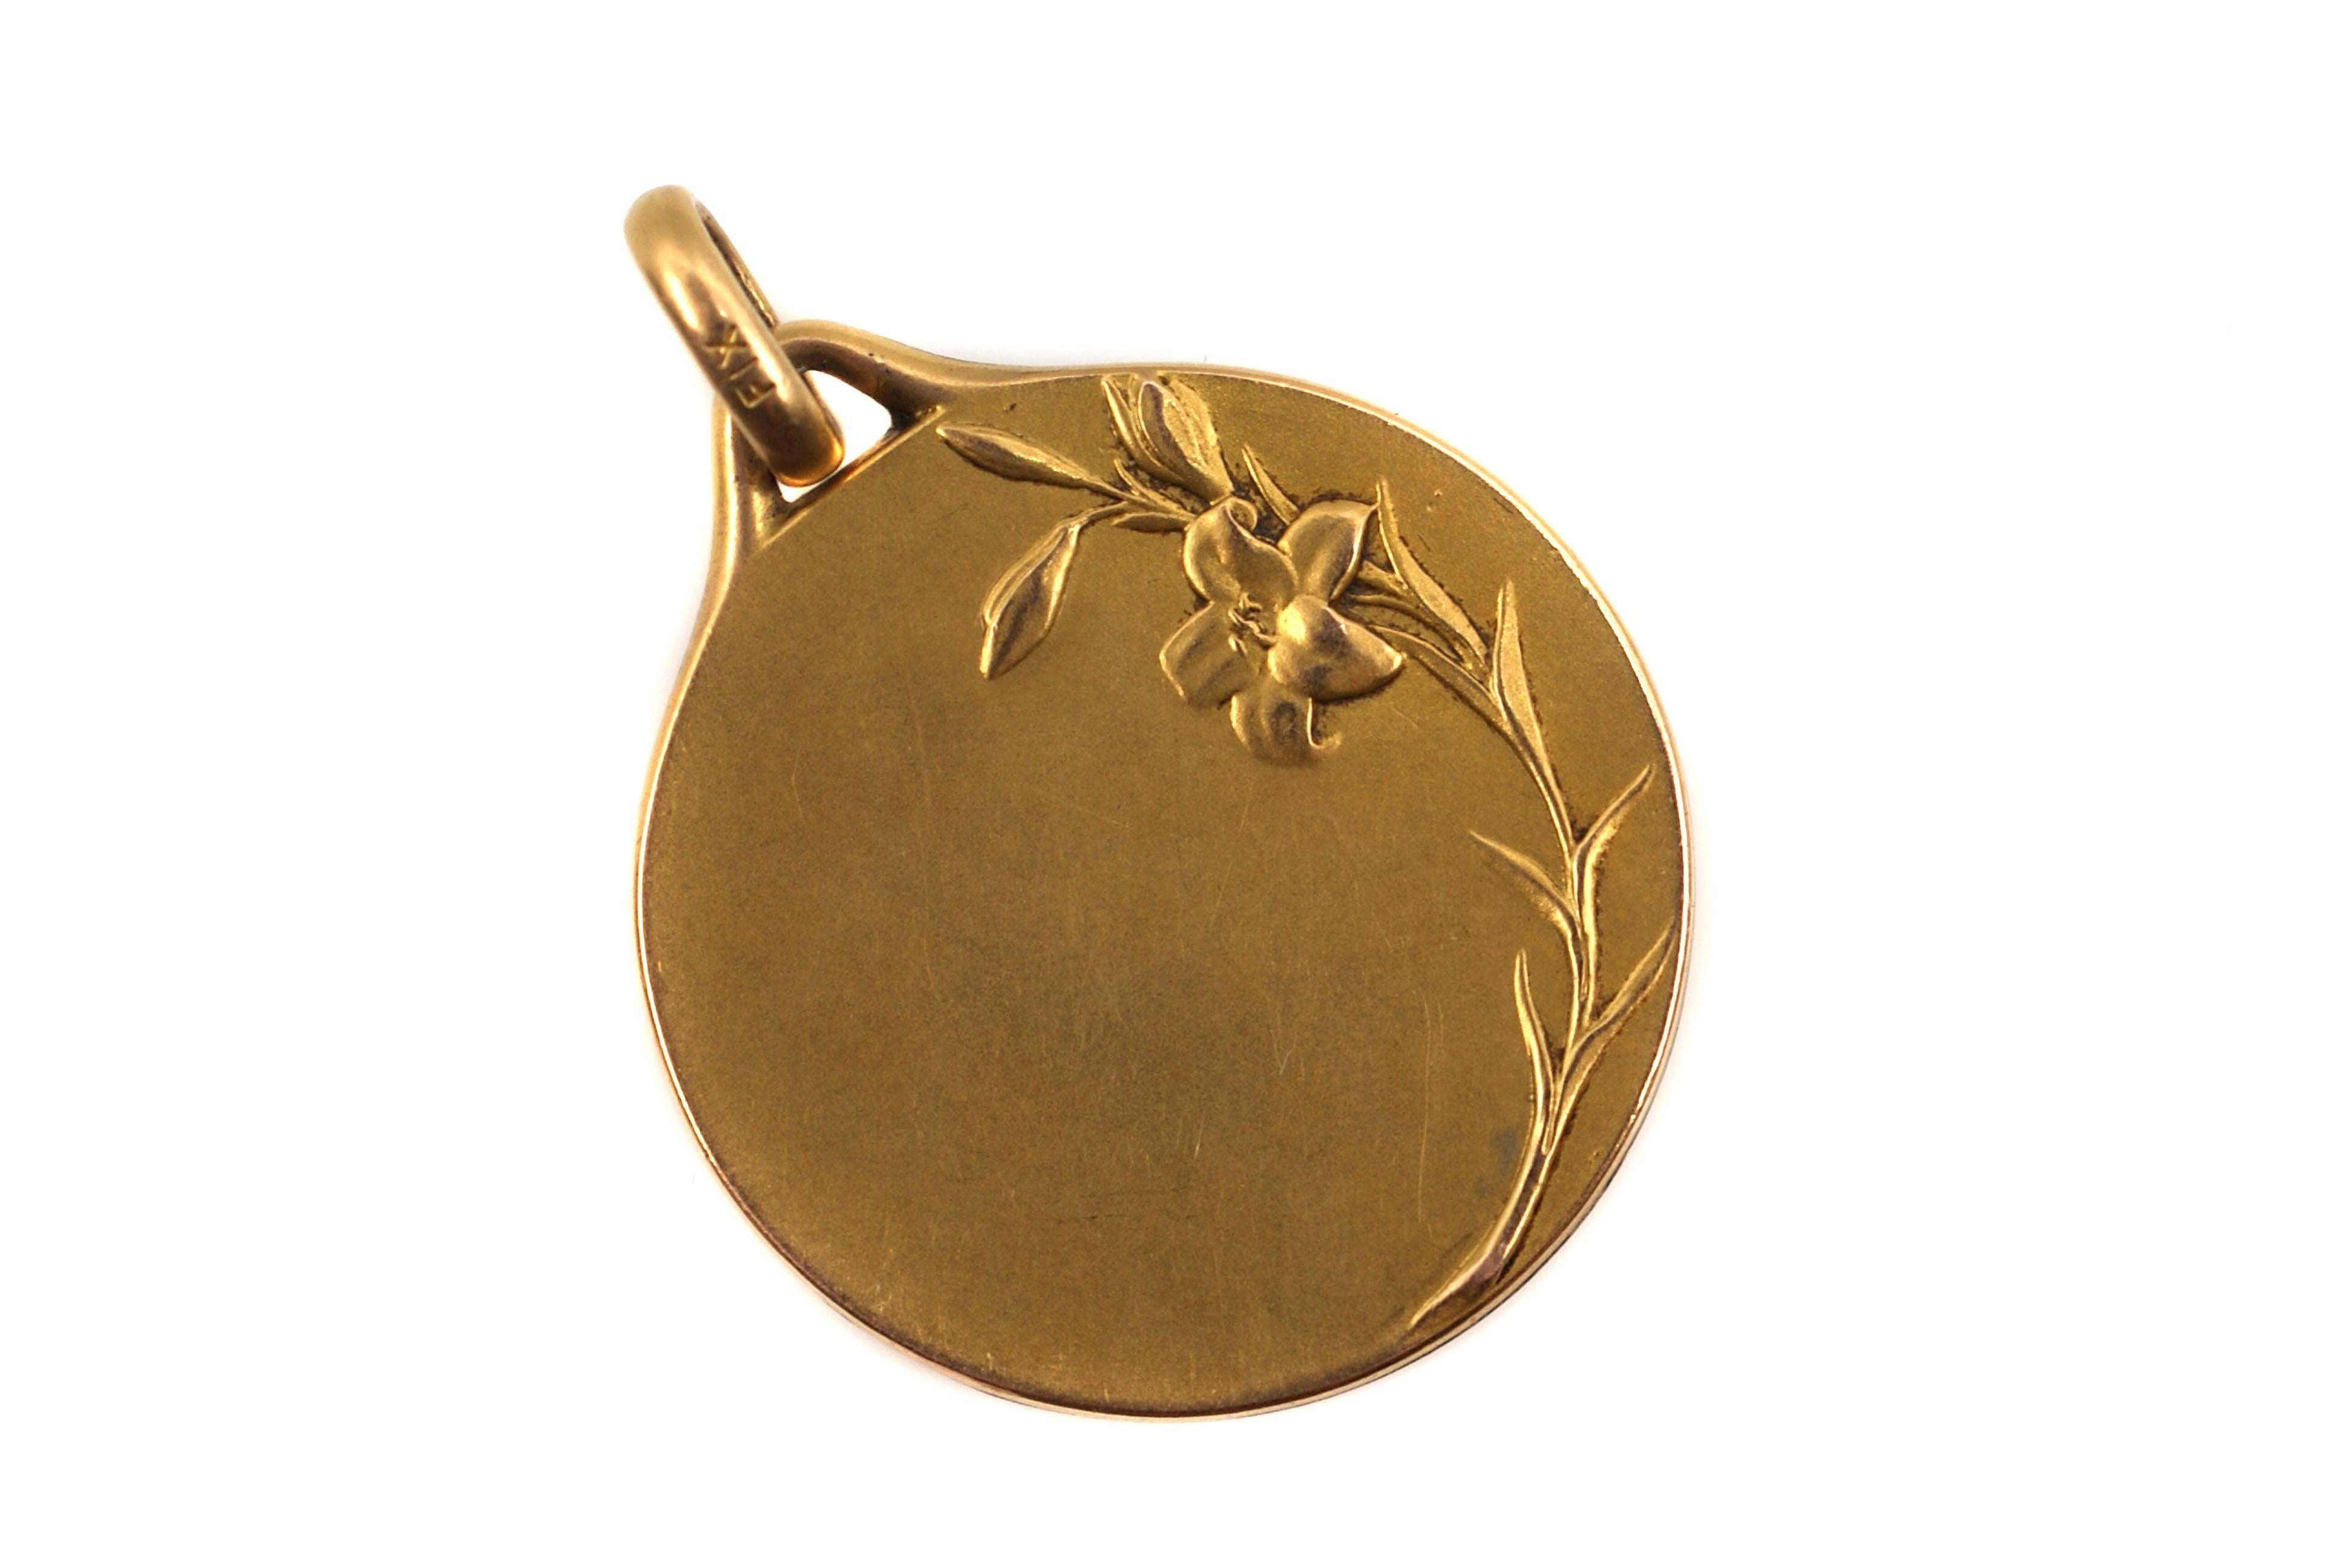 The Art-Nouveau 18 karat yellow gold pendant, from ca. 1880, is a depiction of the Virgin Mary on the front and a floral motif on the back. A true piece of art, immaculately handcrafted, this pendant shows every detail of the face and a finger with